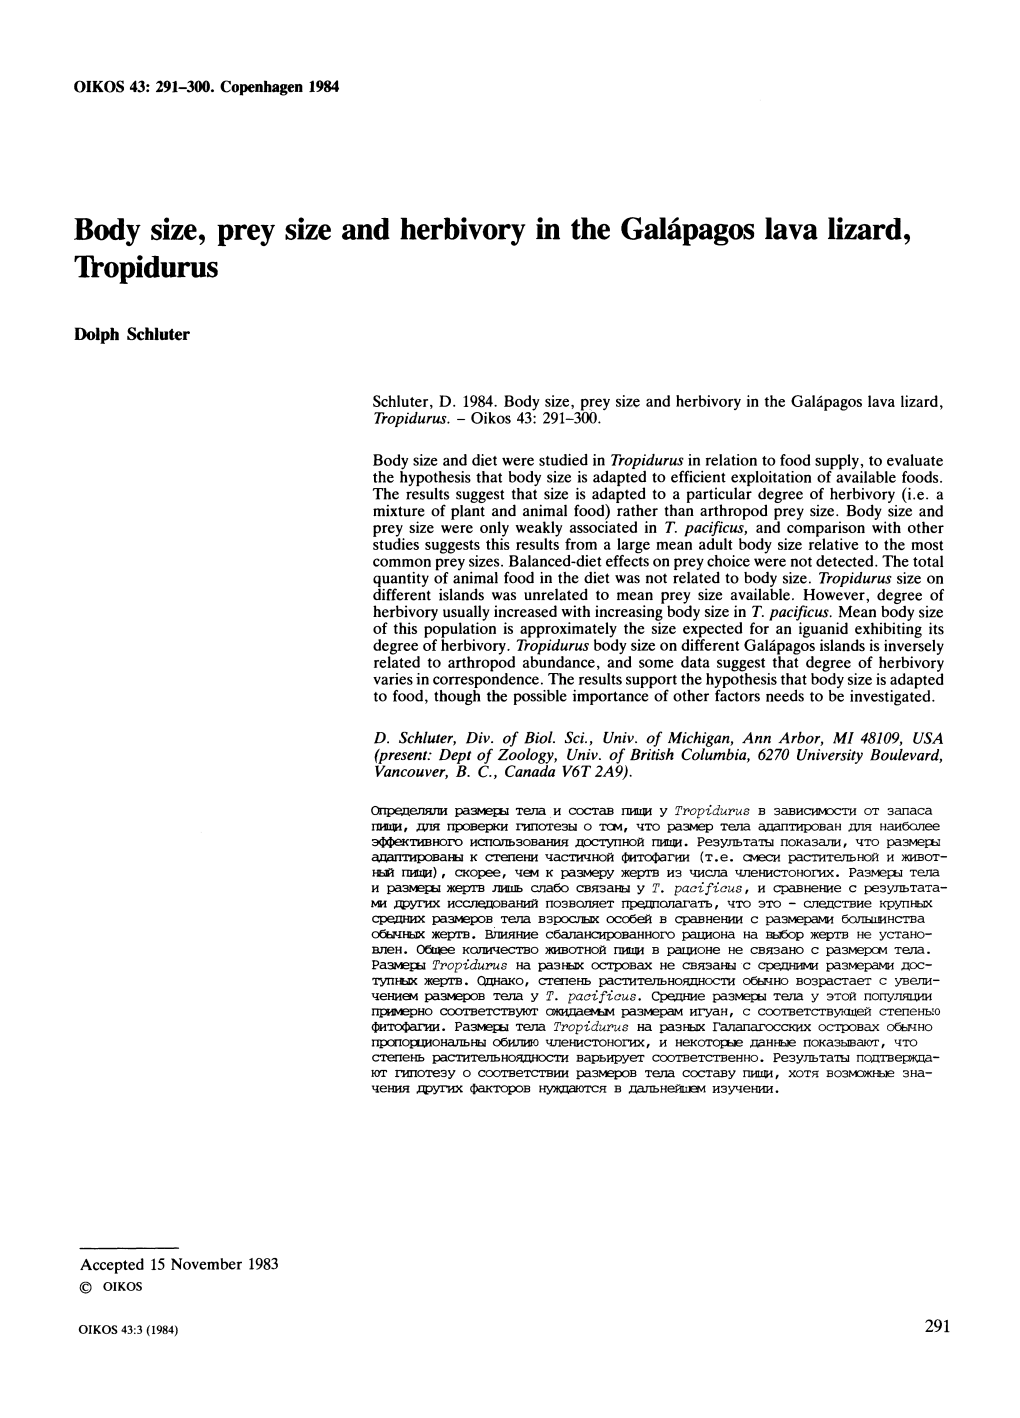 Body Size, Prey Size and Herbivory in the Galapagos Lava Lizard, Lkopidurus